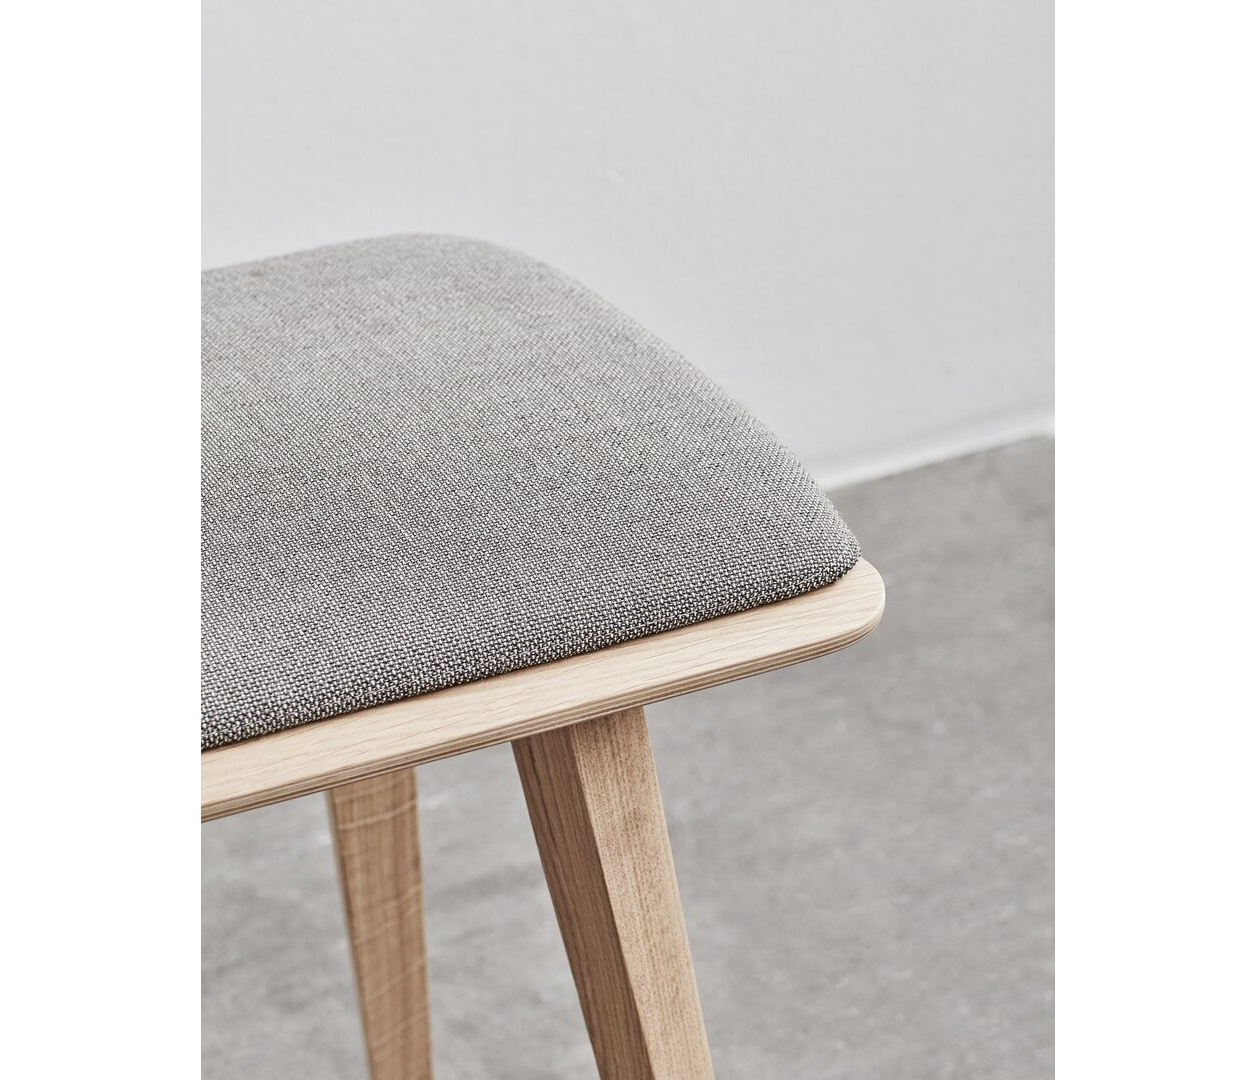 OCEE&FOUR – Stools & Benches – Share Bench – Details Image Large